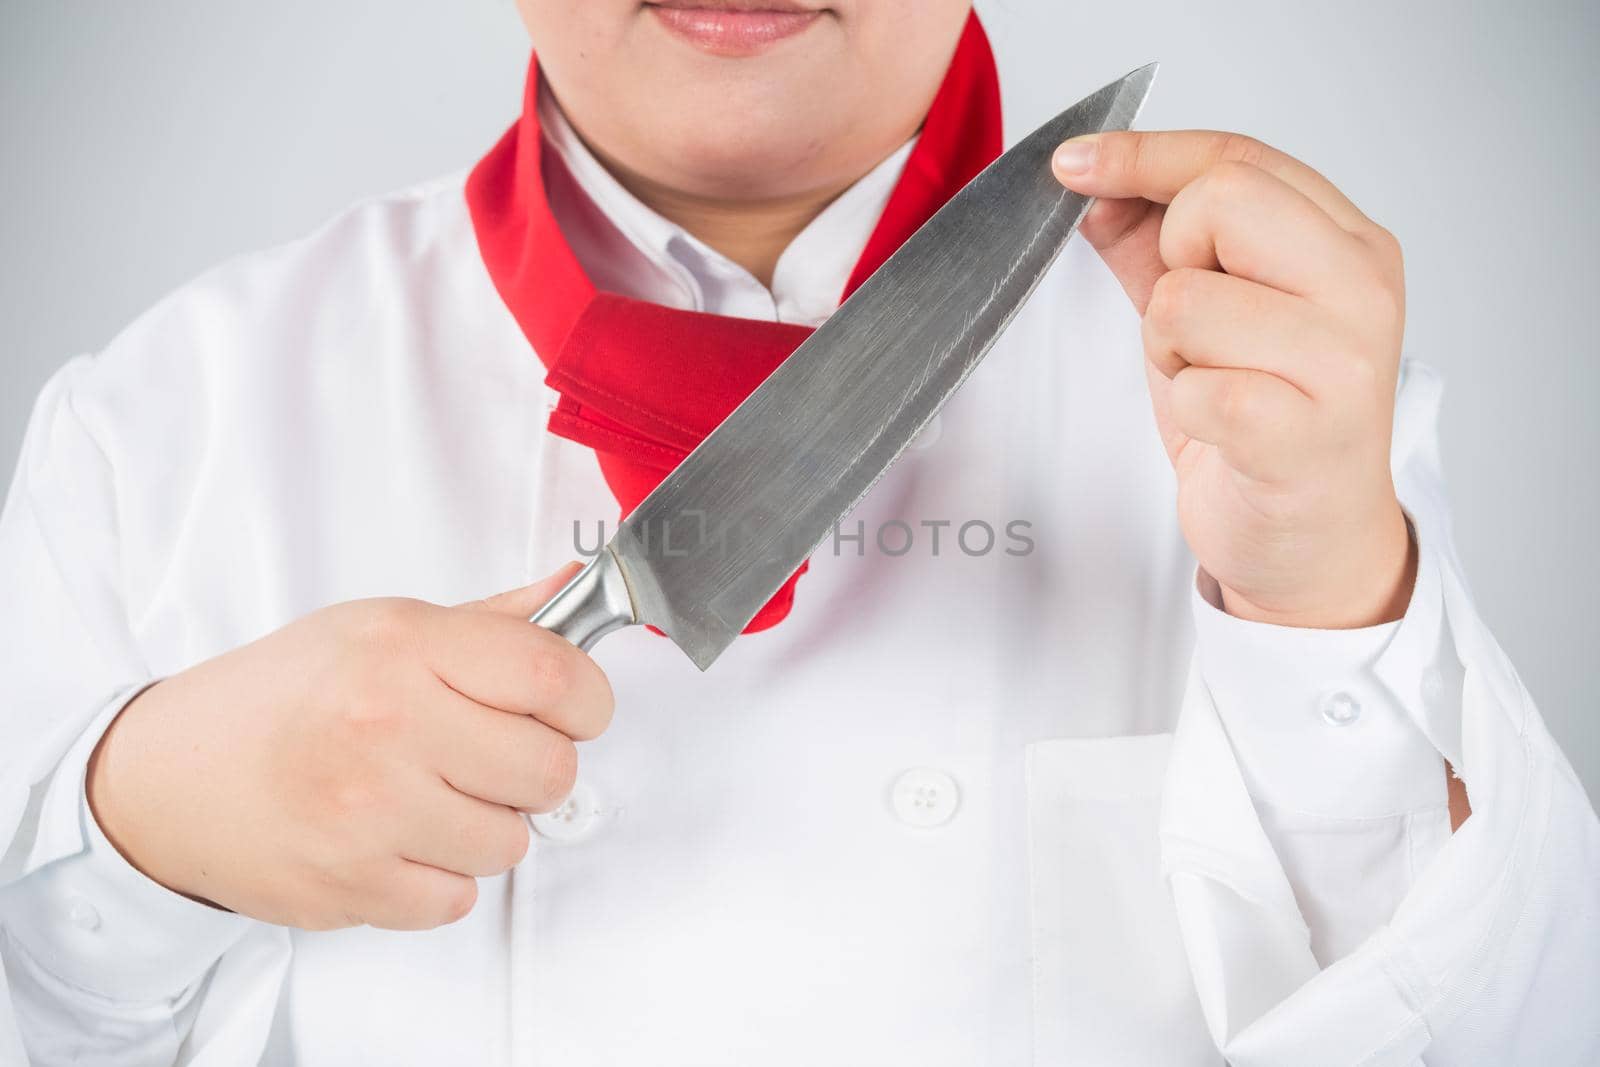 Closeup portrait of a male chef cook sharpening knife isolated on a white background